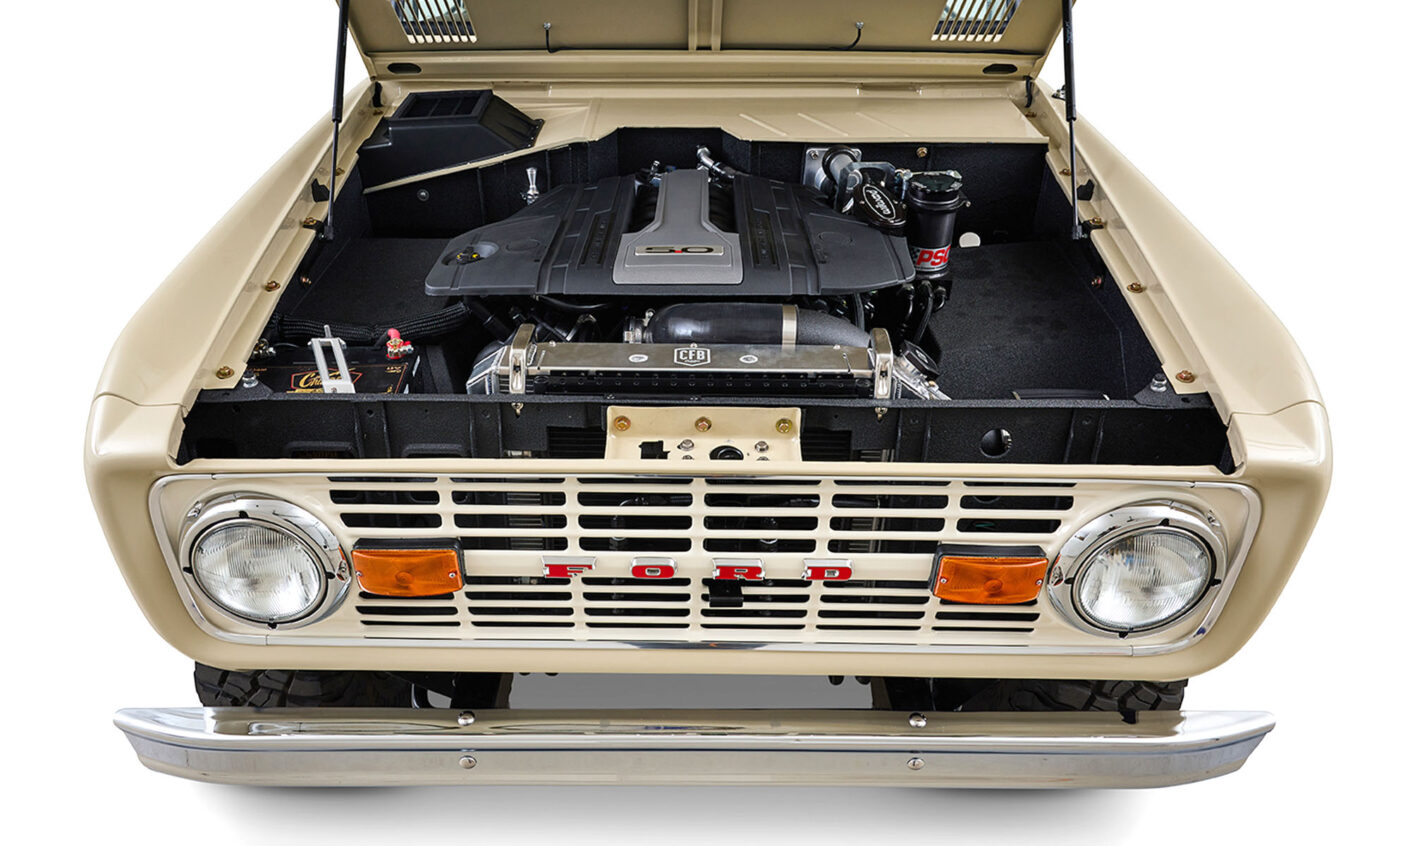 Ford Bronco 1975 Quicksand Coyote Series with Custom Leather Tartan Interior 5.0 Engine